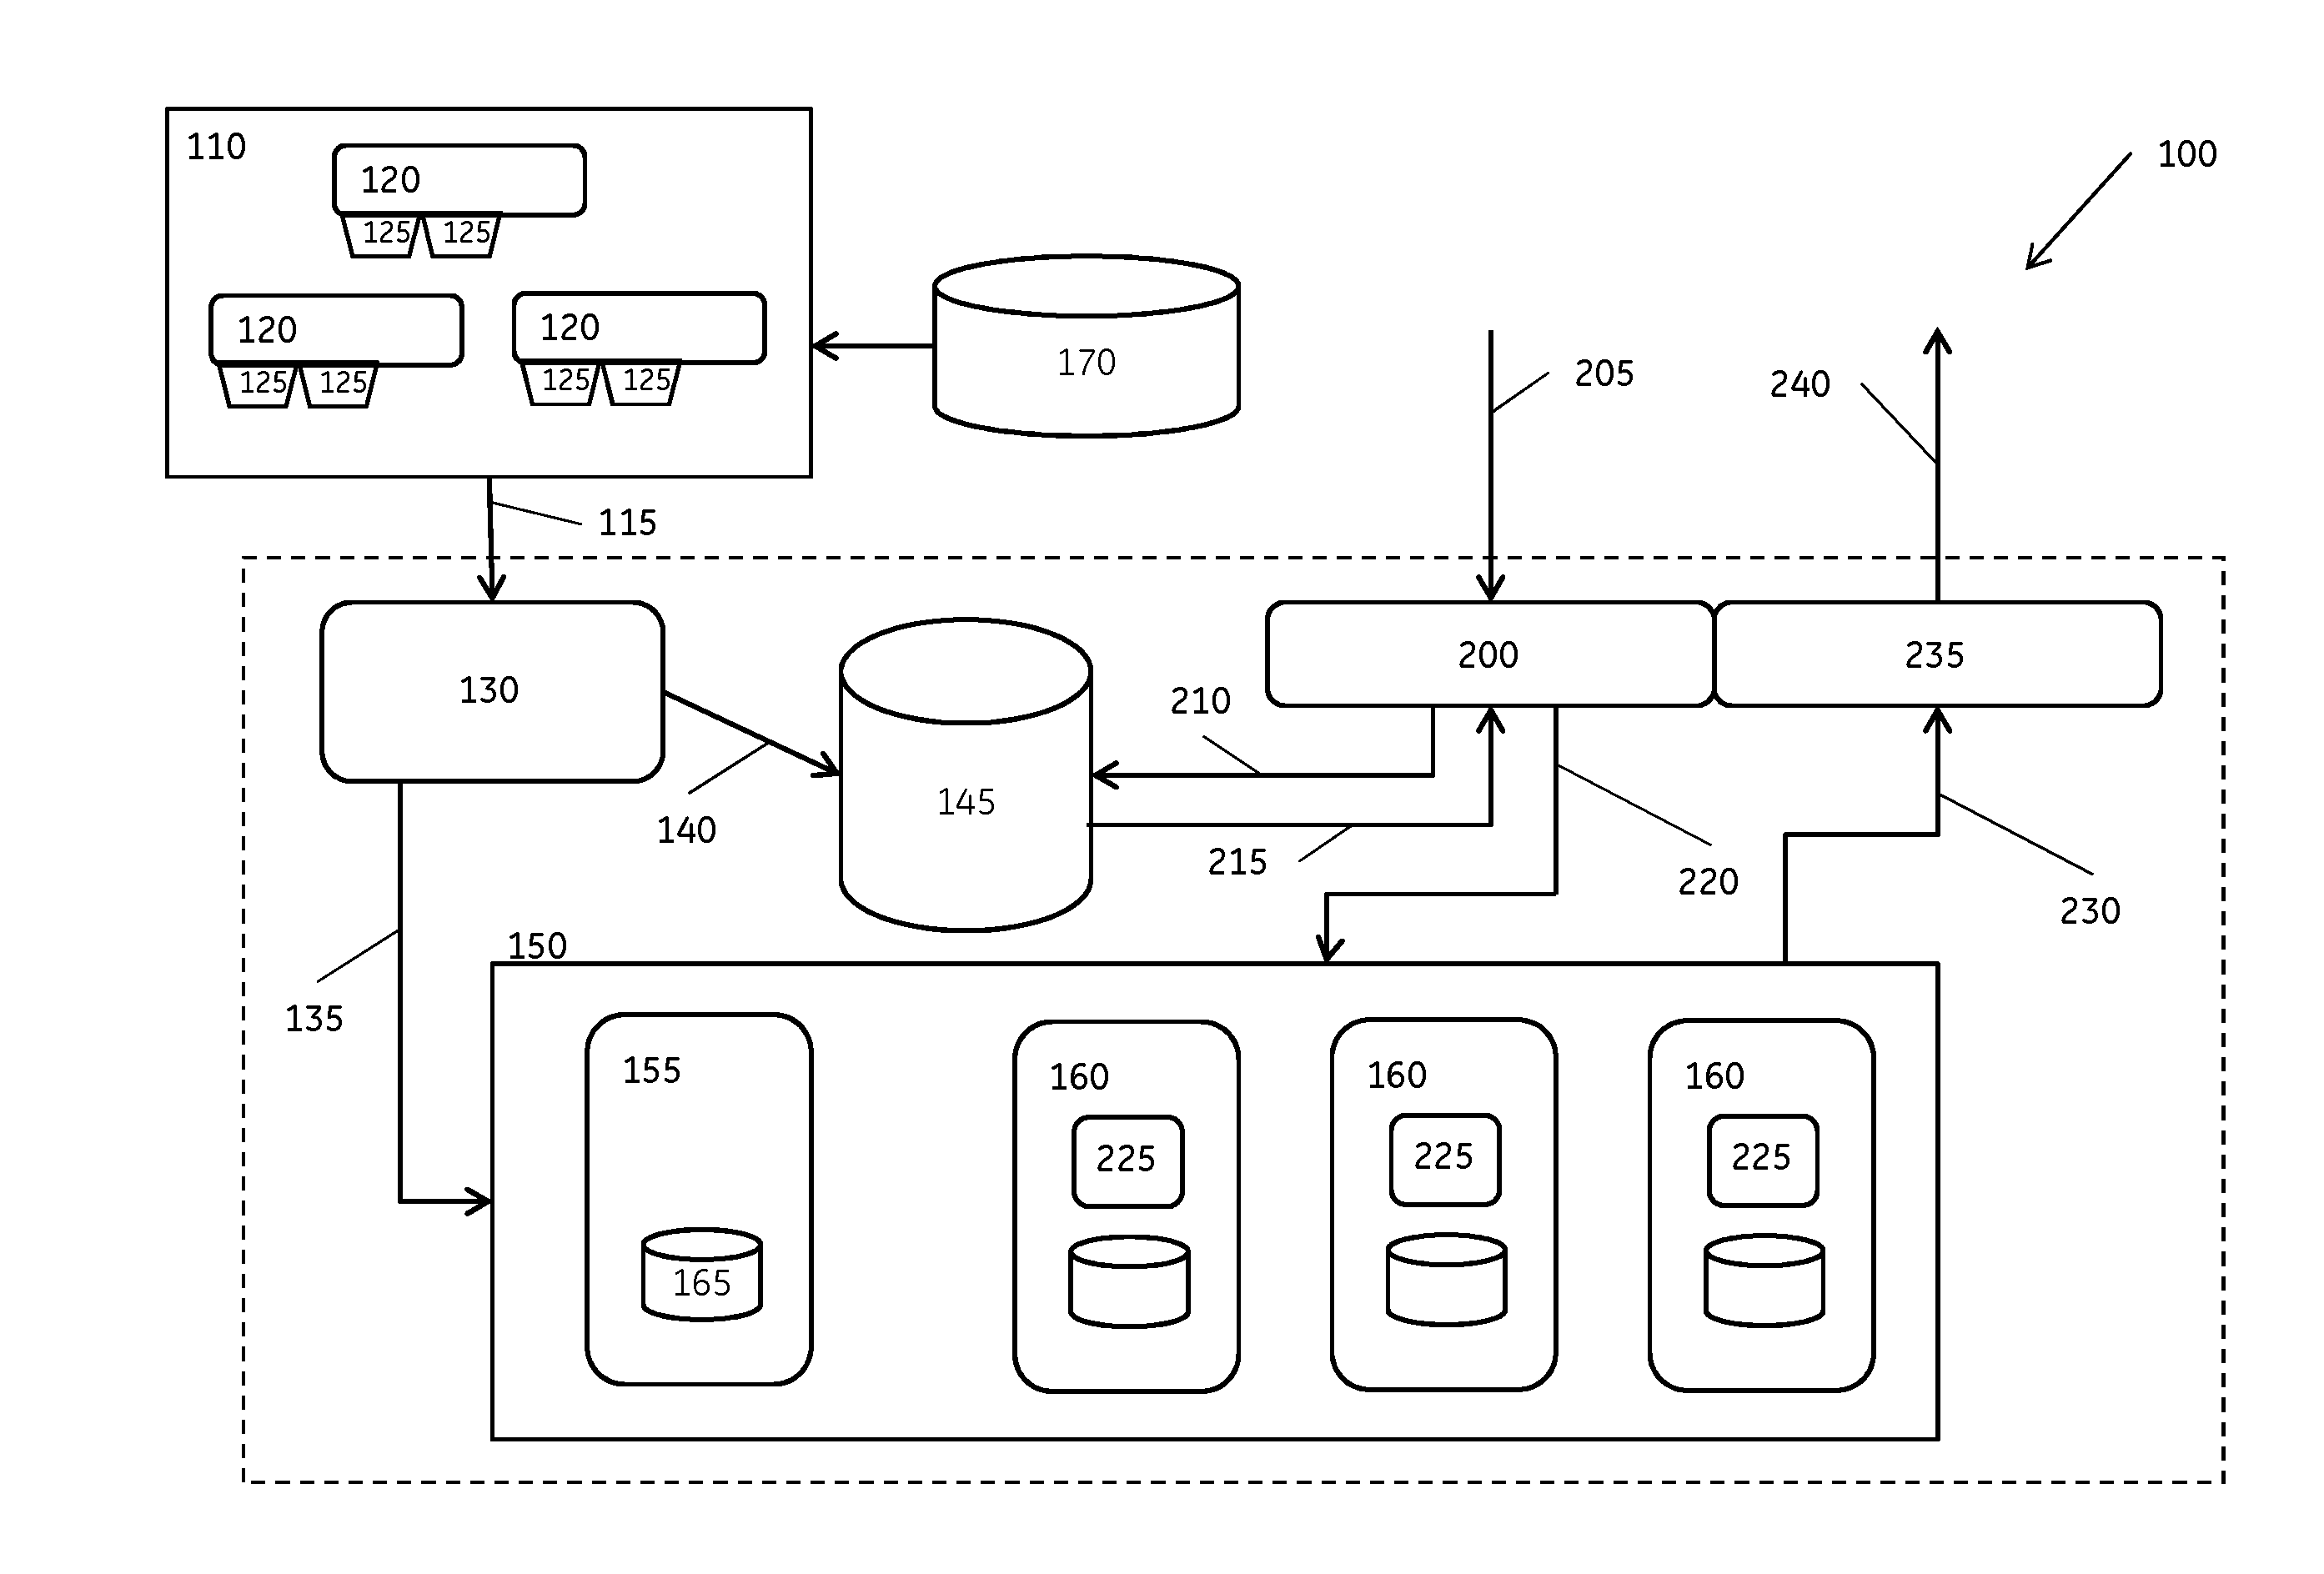 System and method for storage, querying, and analysis service for time series data